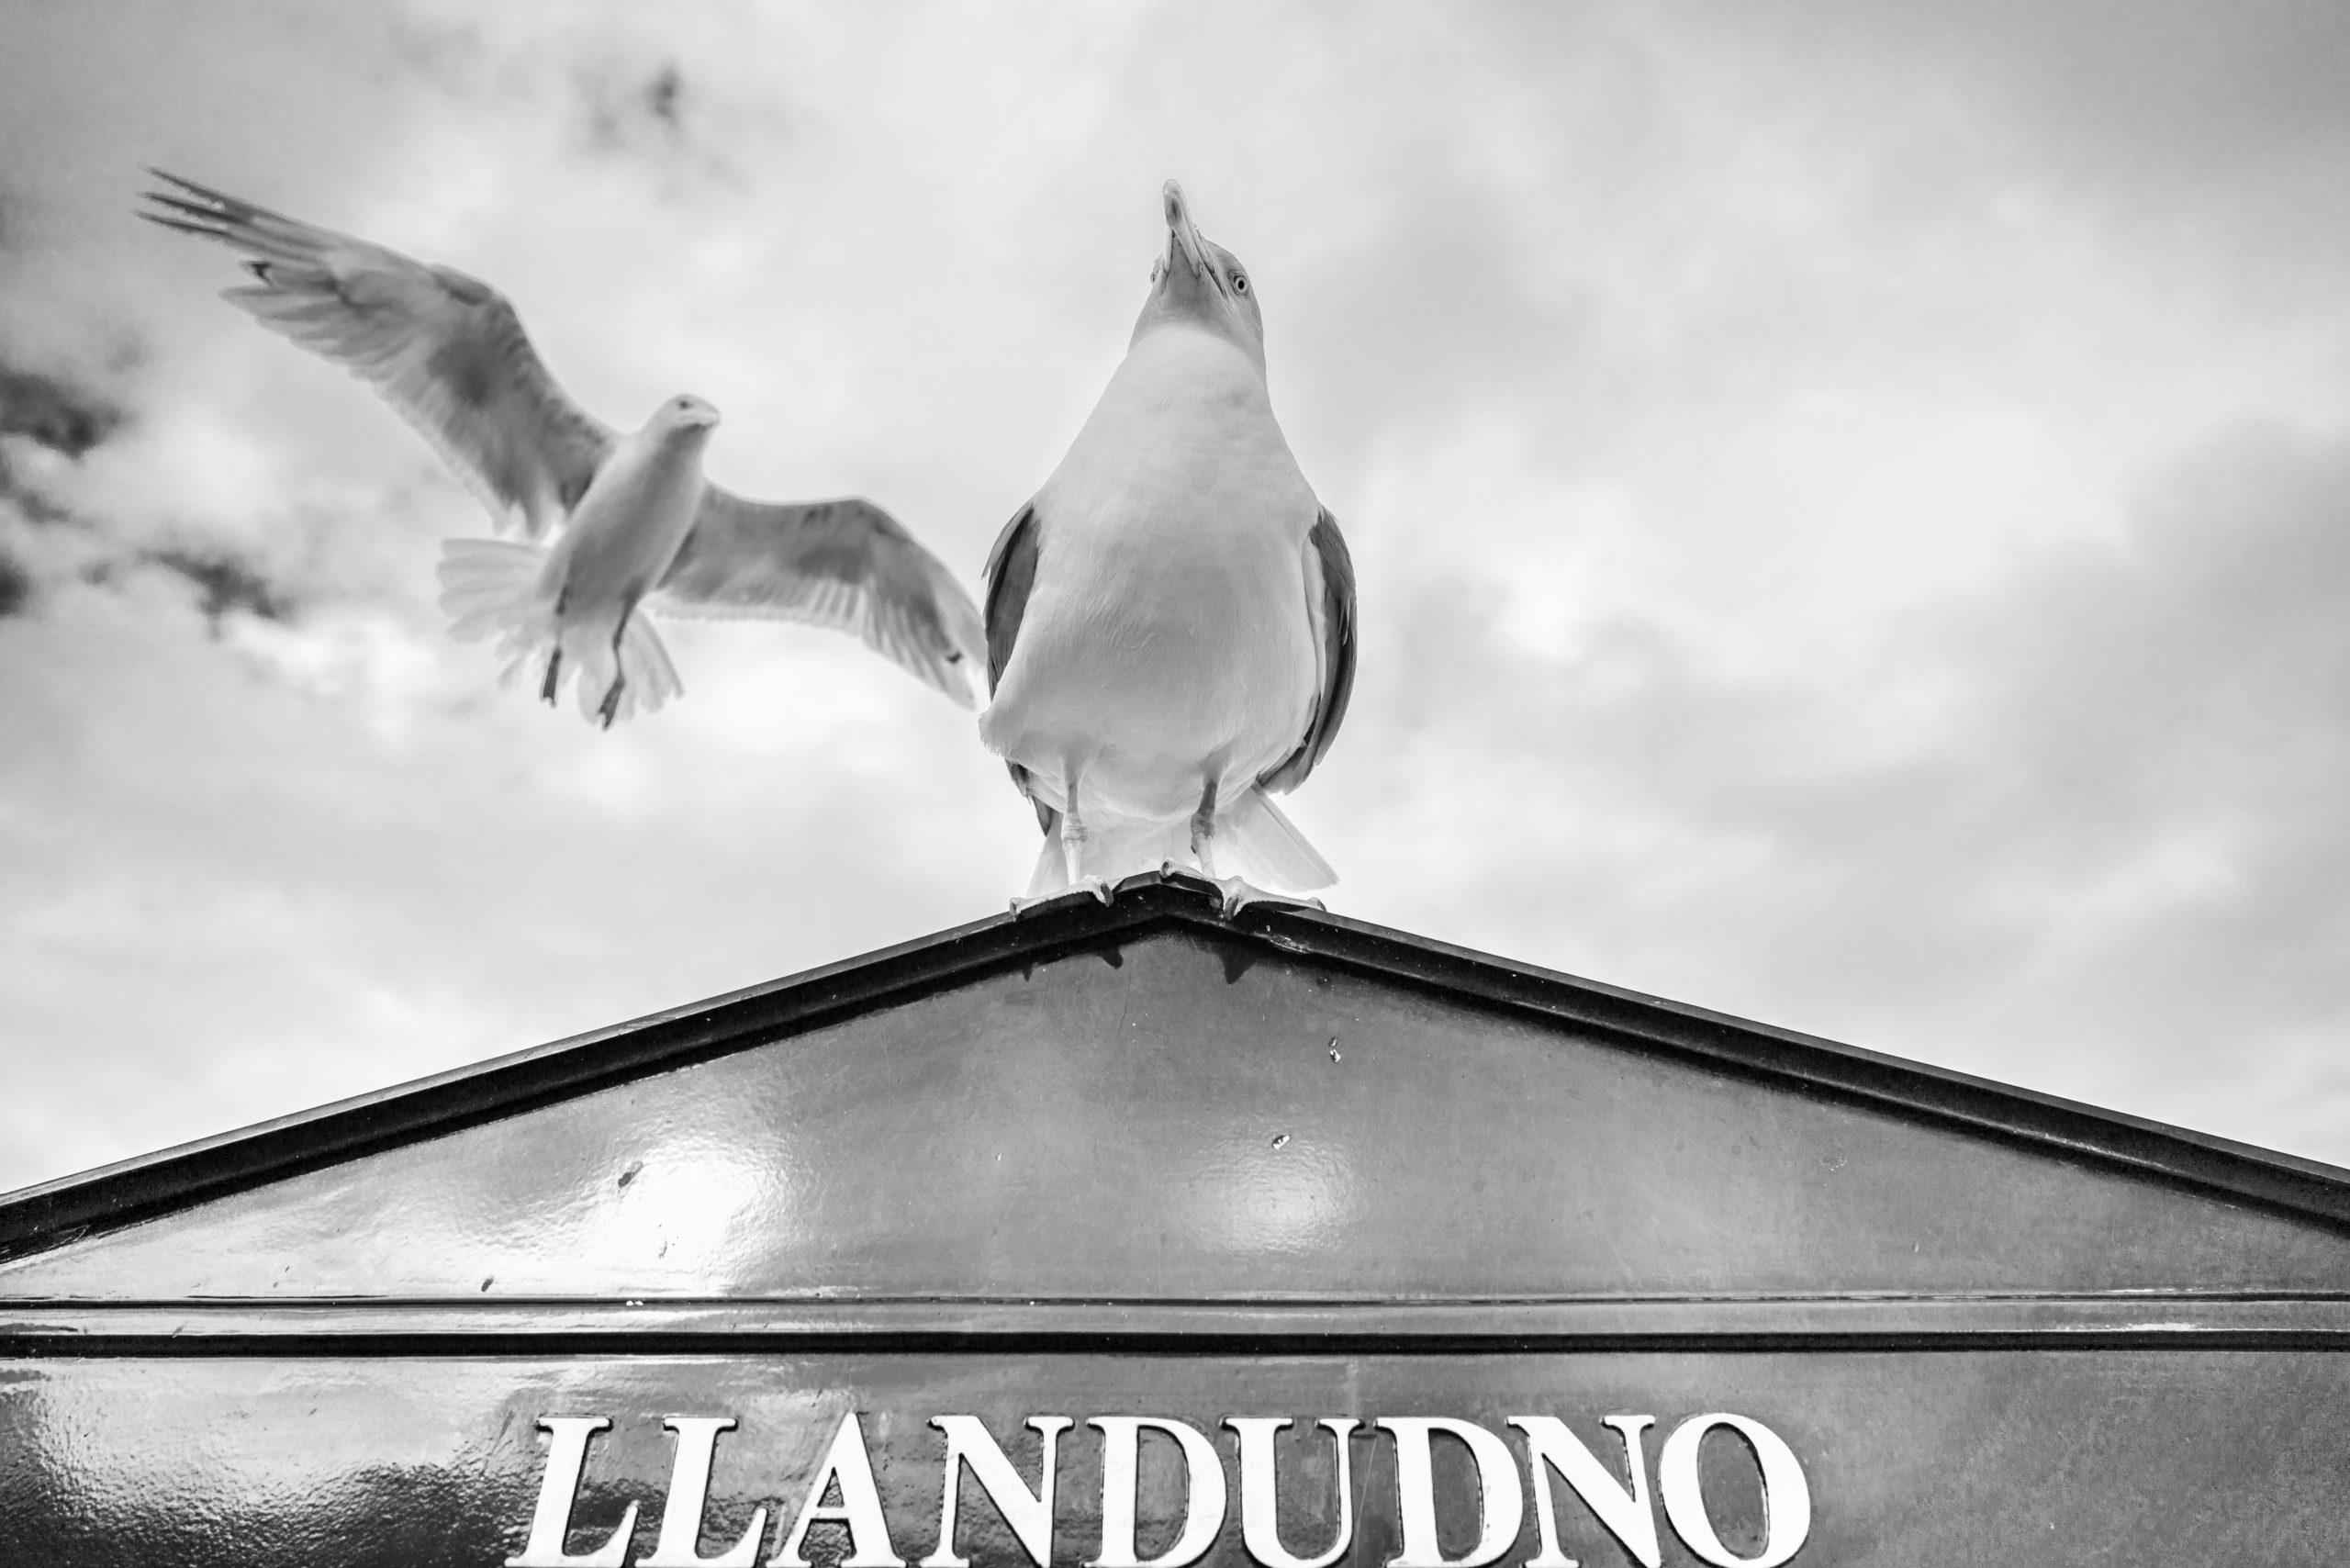 Seagulls on a sign post in Llandudno, Wales, UK. Black and white photography.